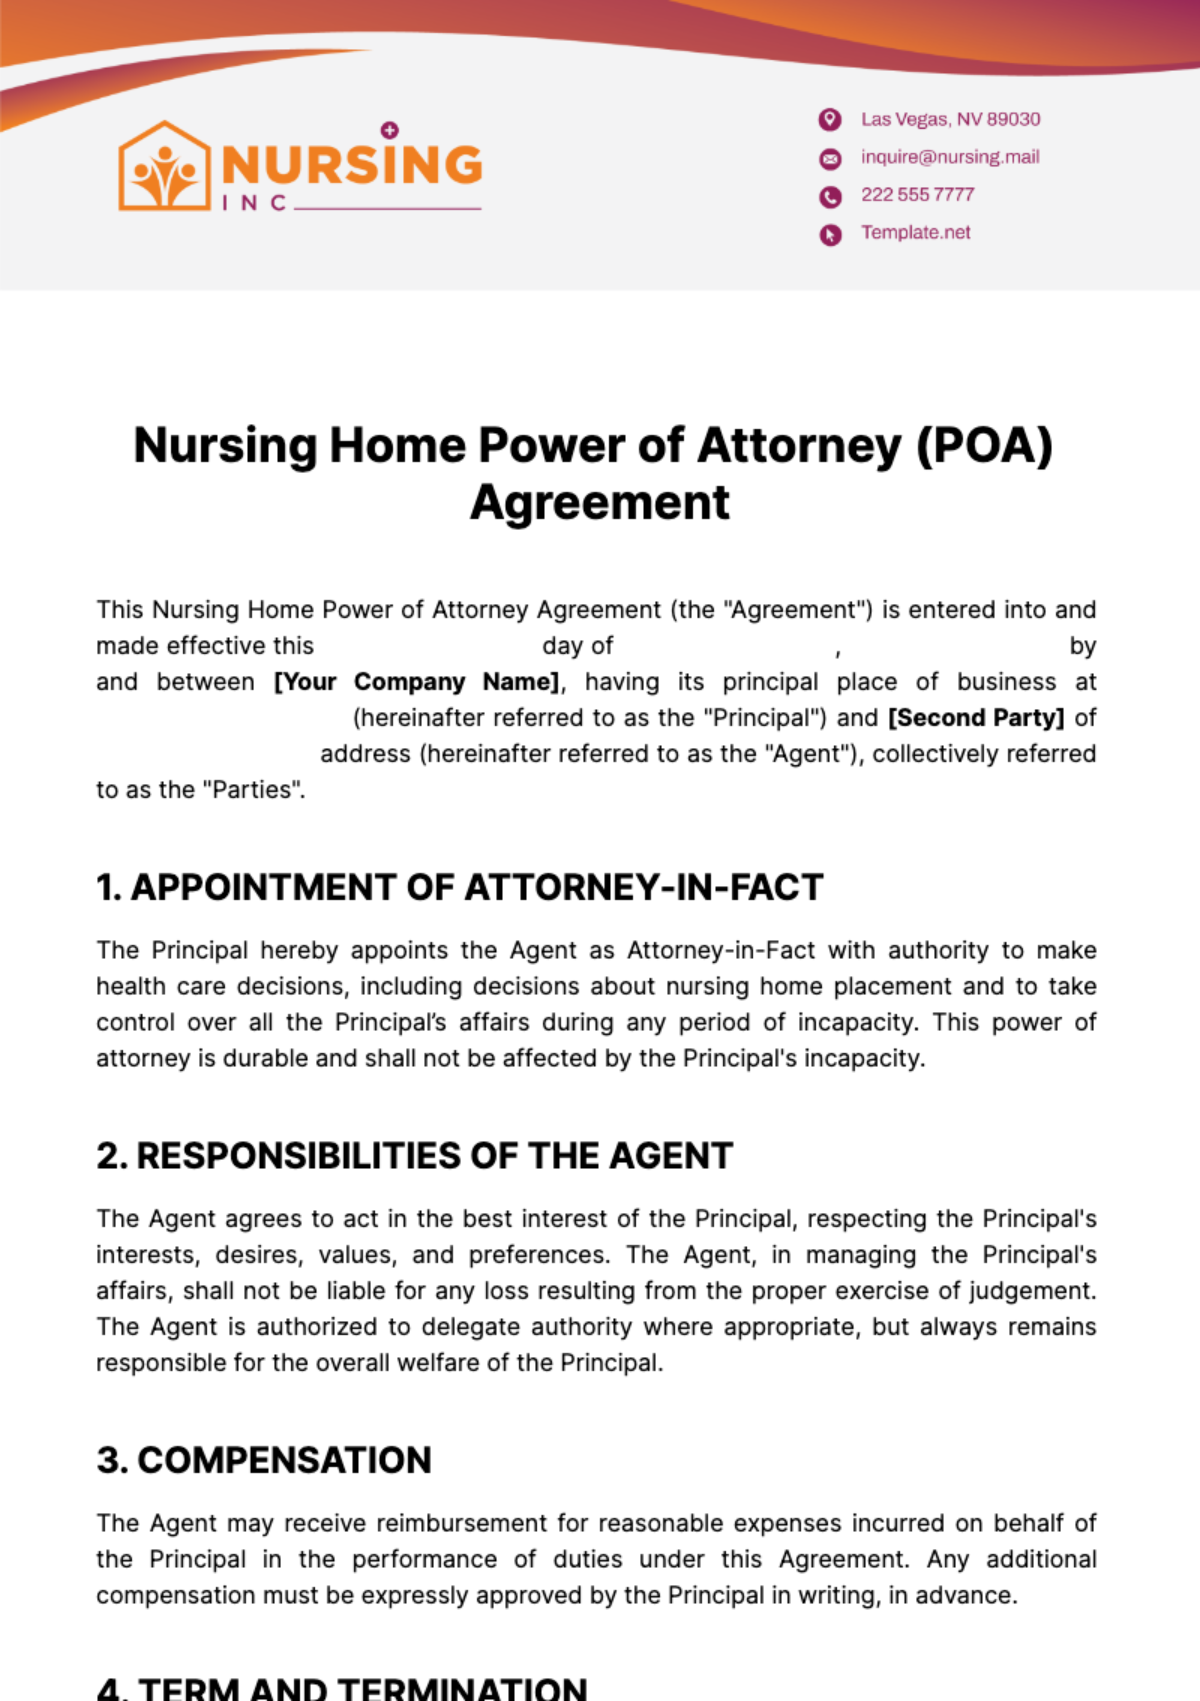 Nursing Home Power of Attorney (POA) Agreement Template